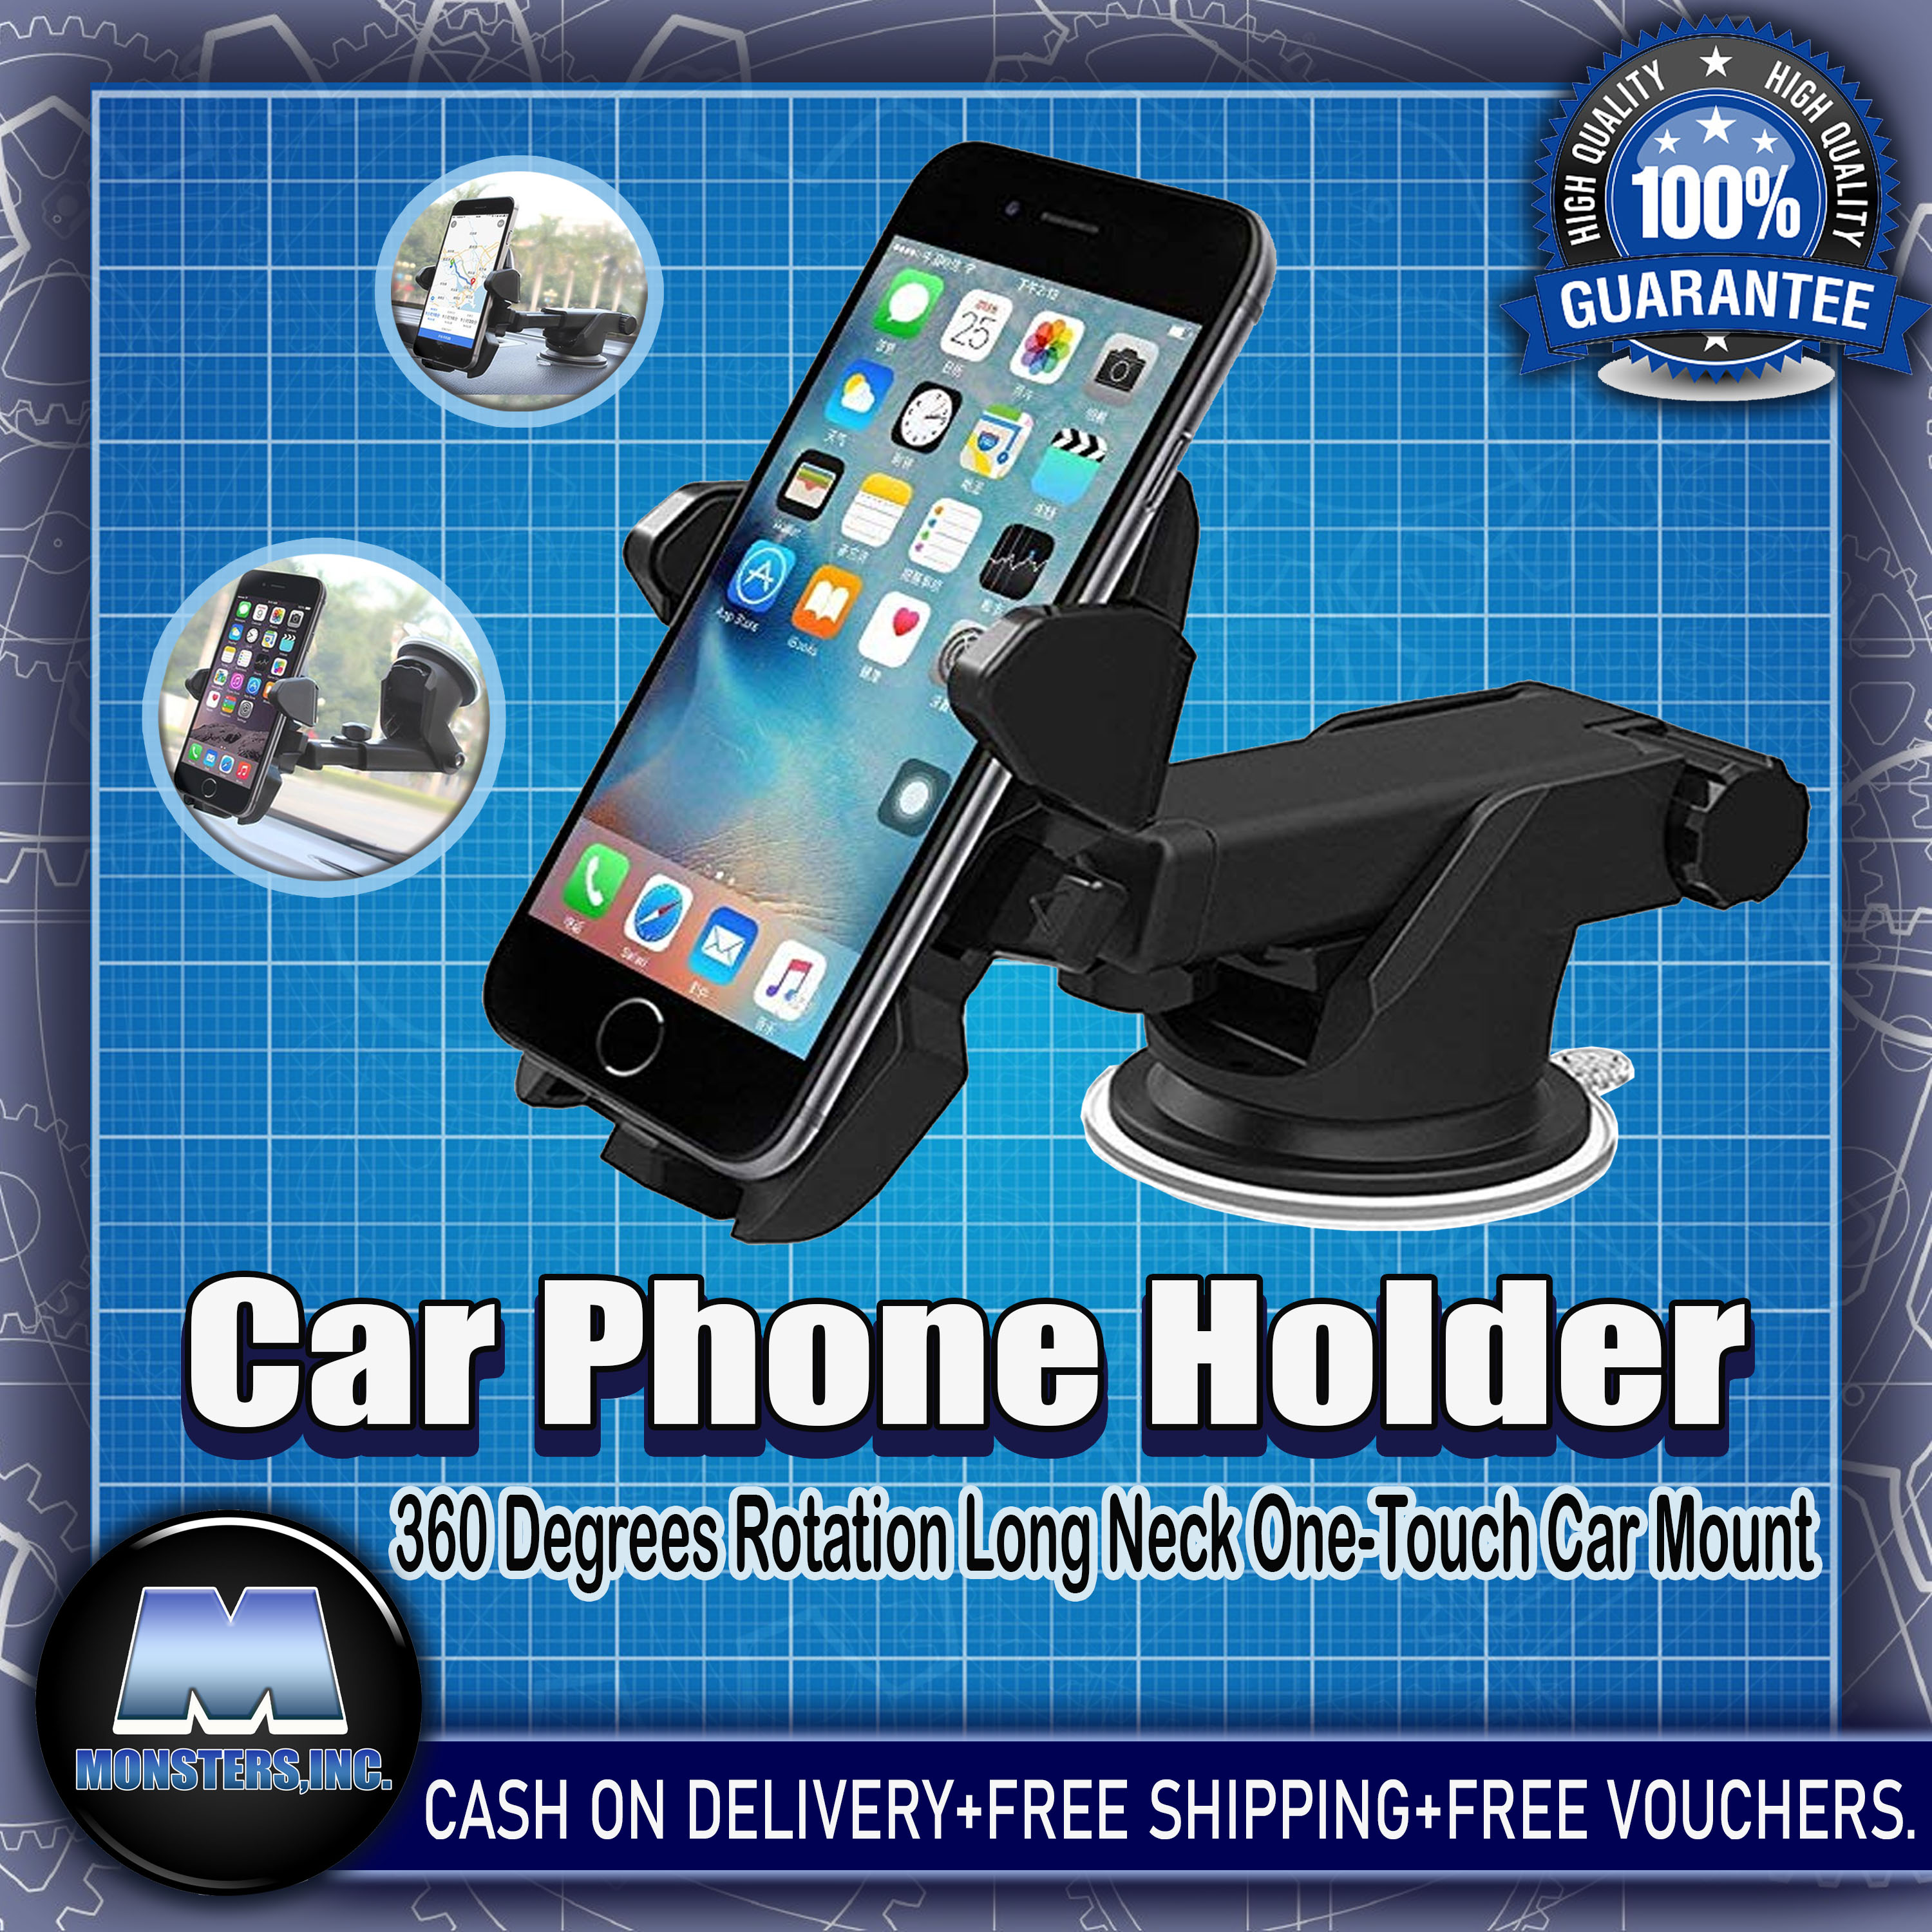 New Car Phone Holder Dashoboard Smartphone Stand 360 Degree Rotation Gear Bottom Design Universal For Phones Support In Car